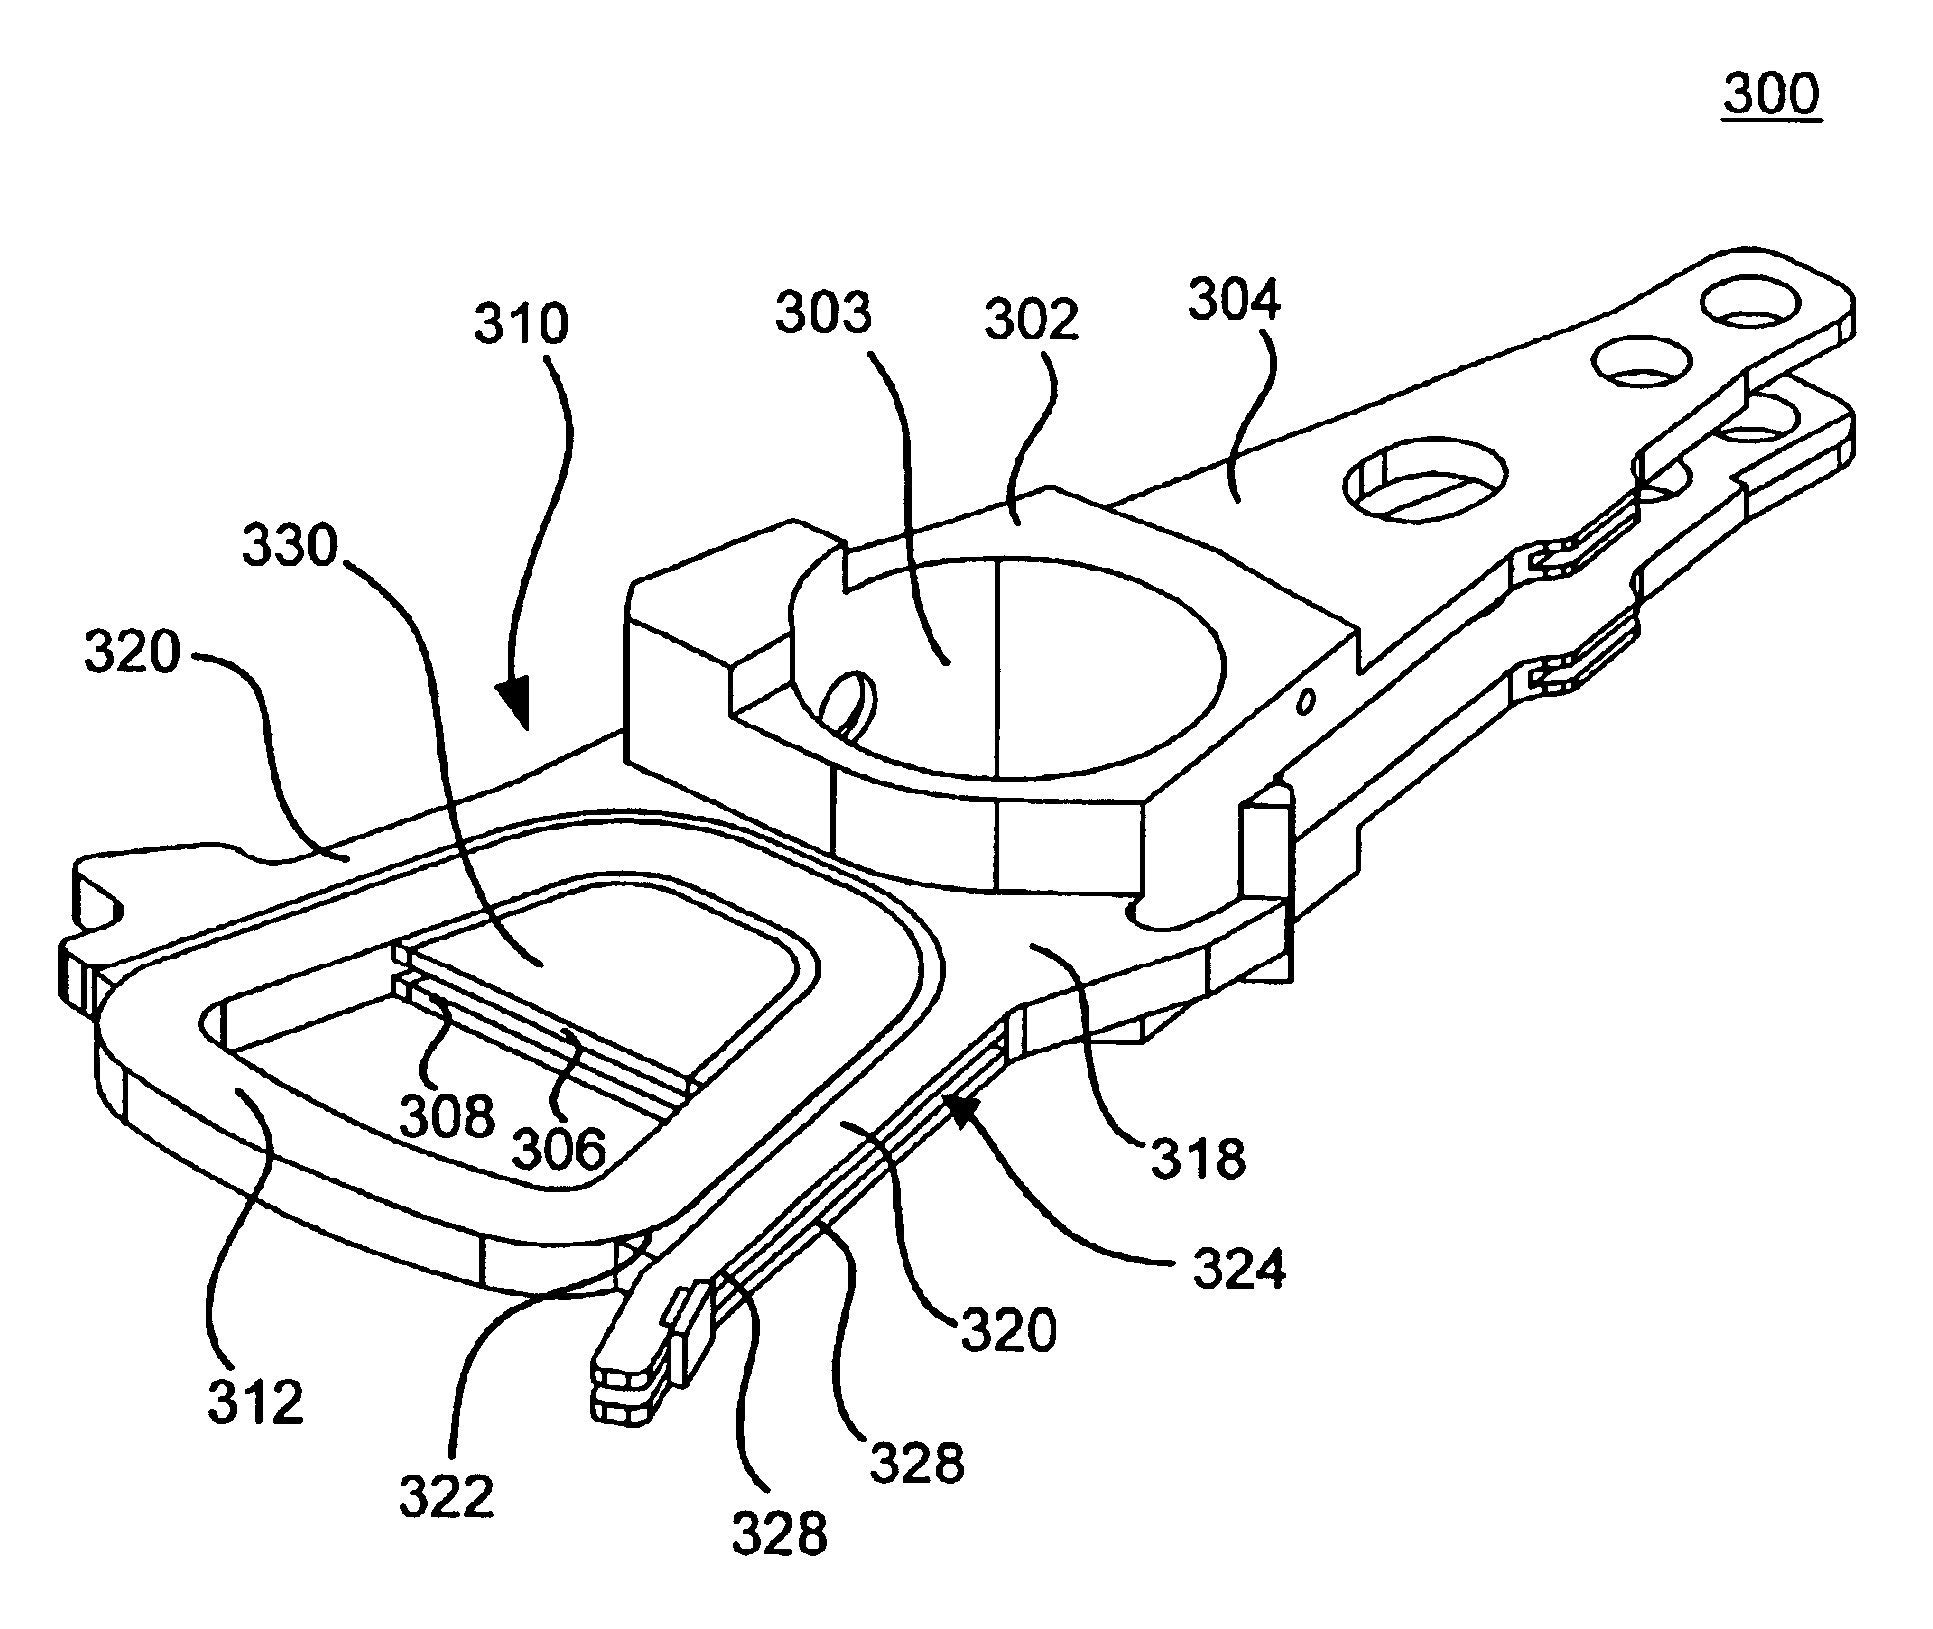 Actuator for use with a disk drive having a coil assembly designed to aid in heat convection from the coil of the coil assembly